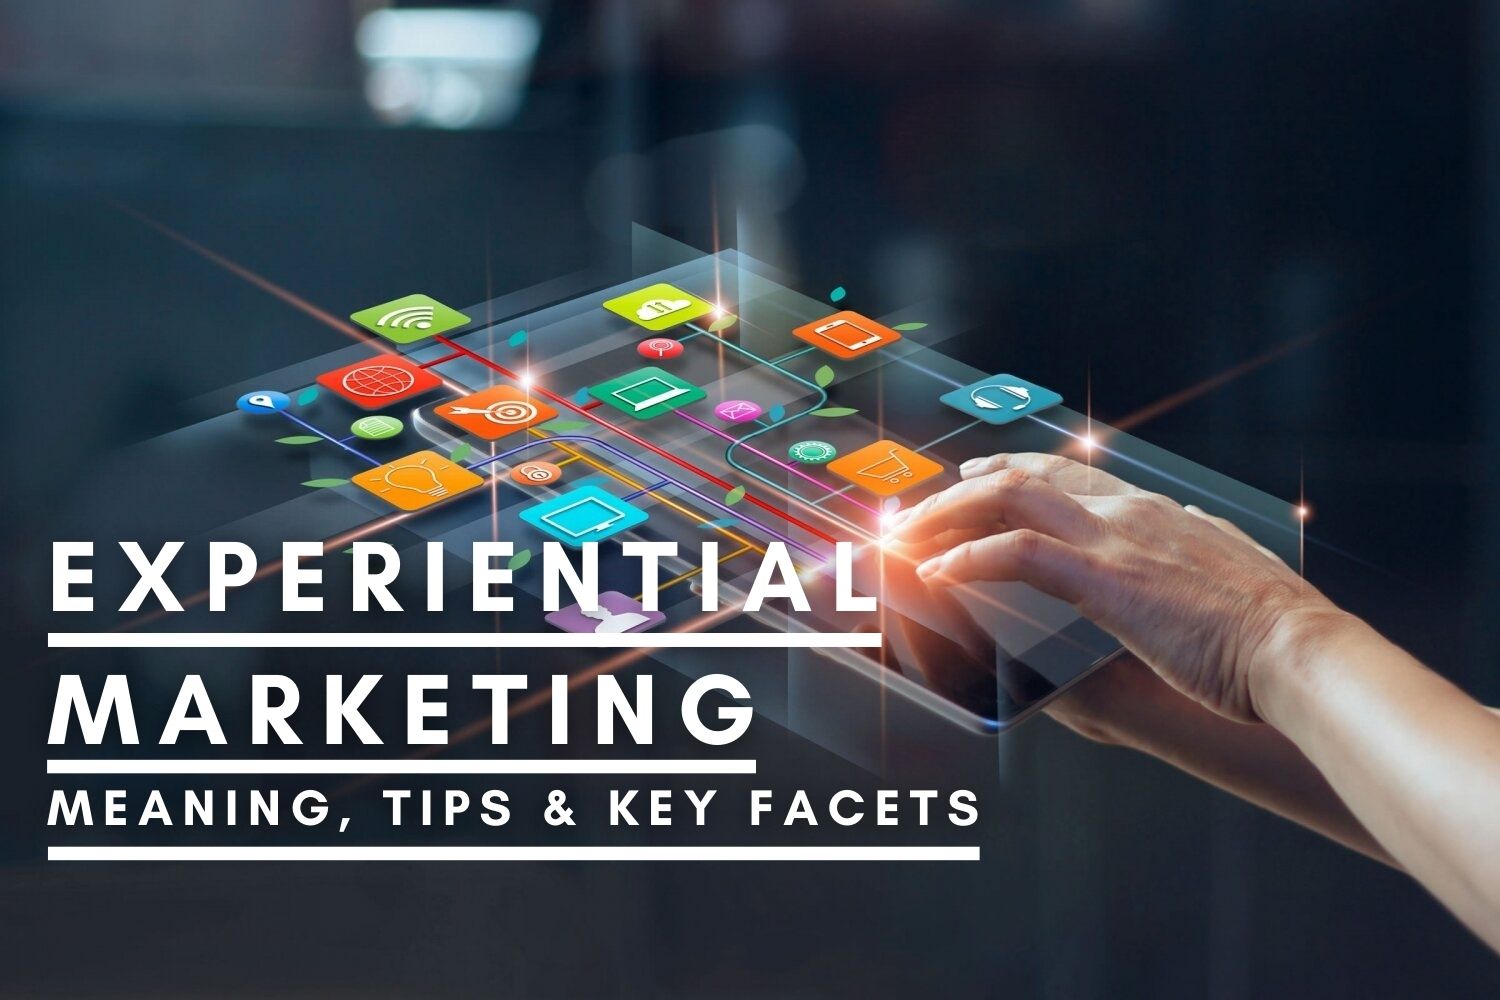 Experiential Marketing – Meaning, Tips & Key Facets To Explore In 2021